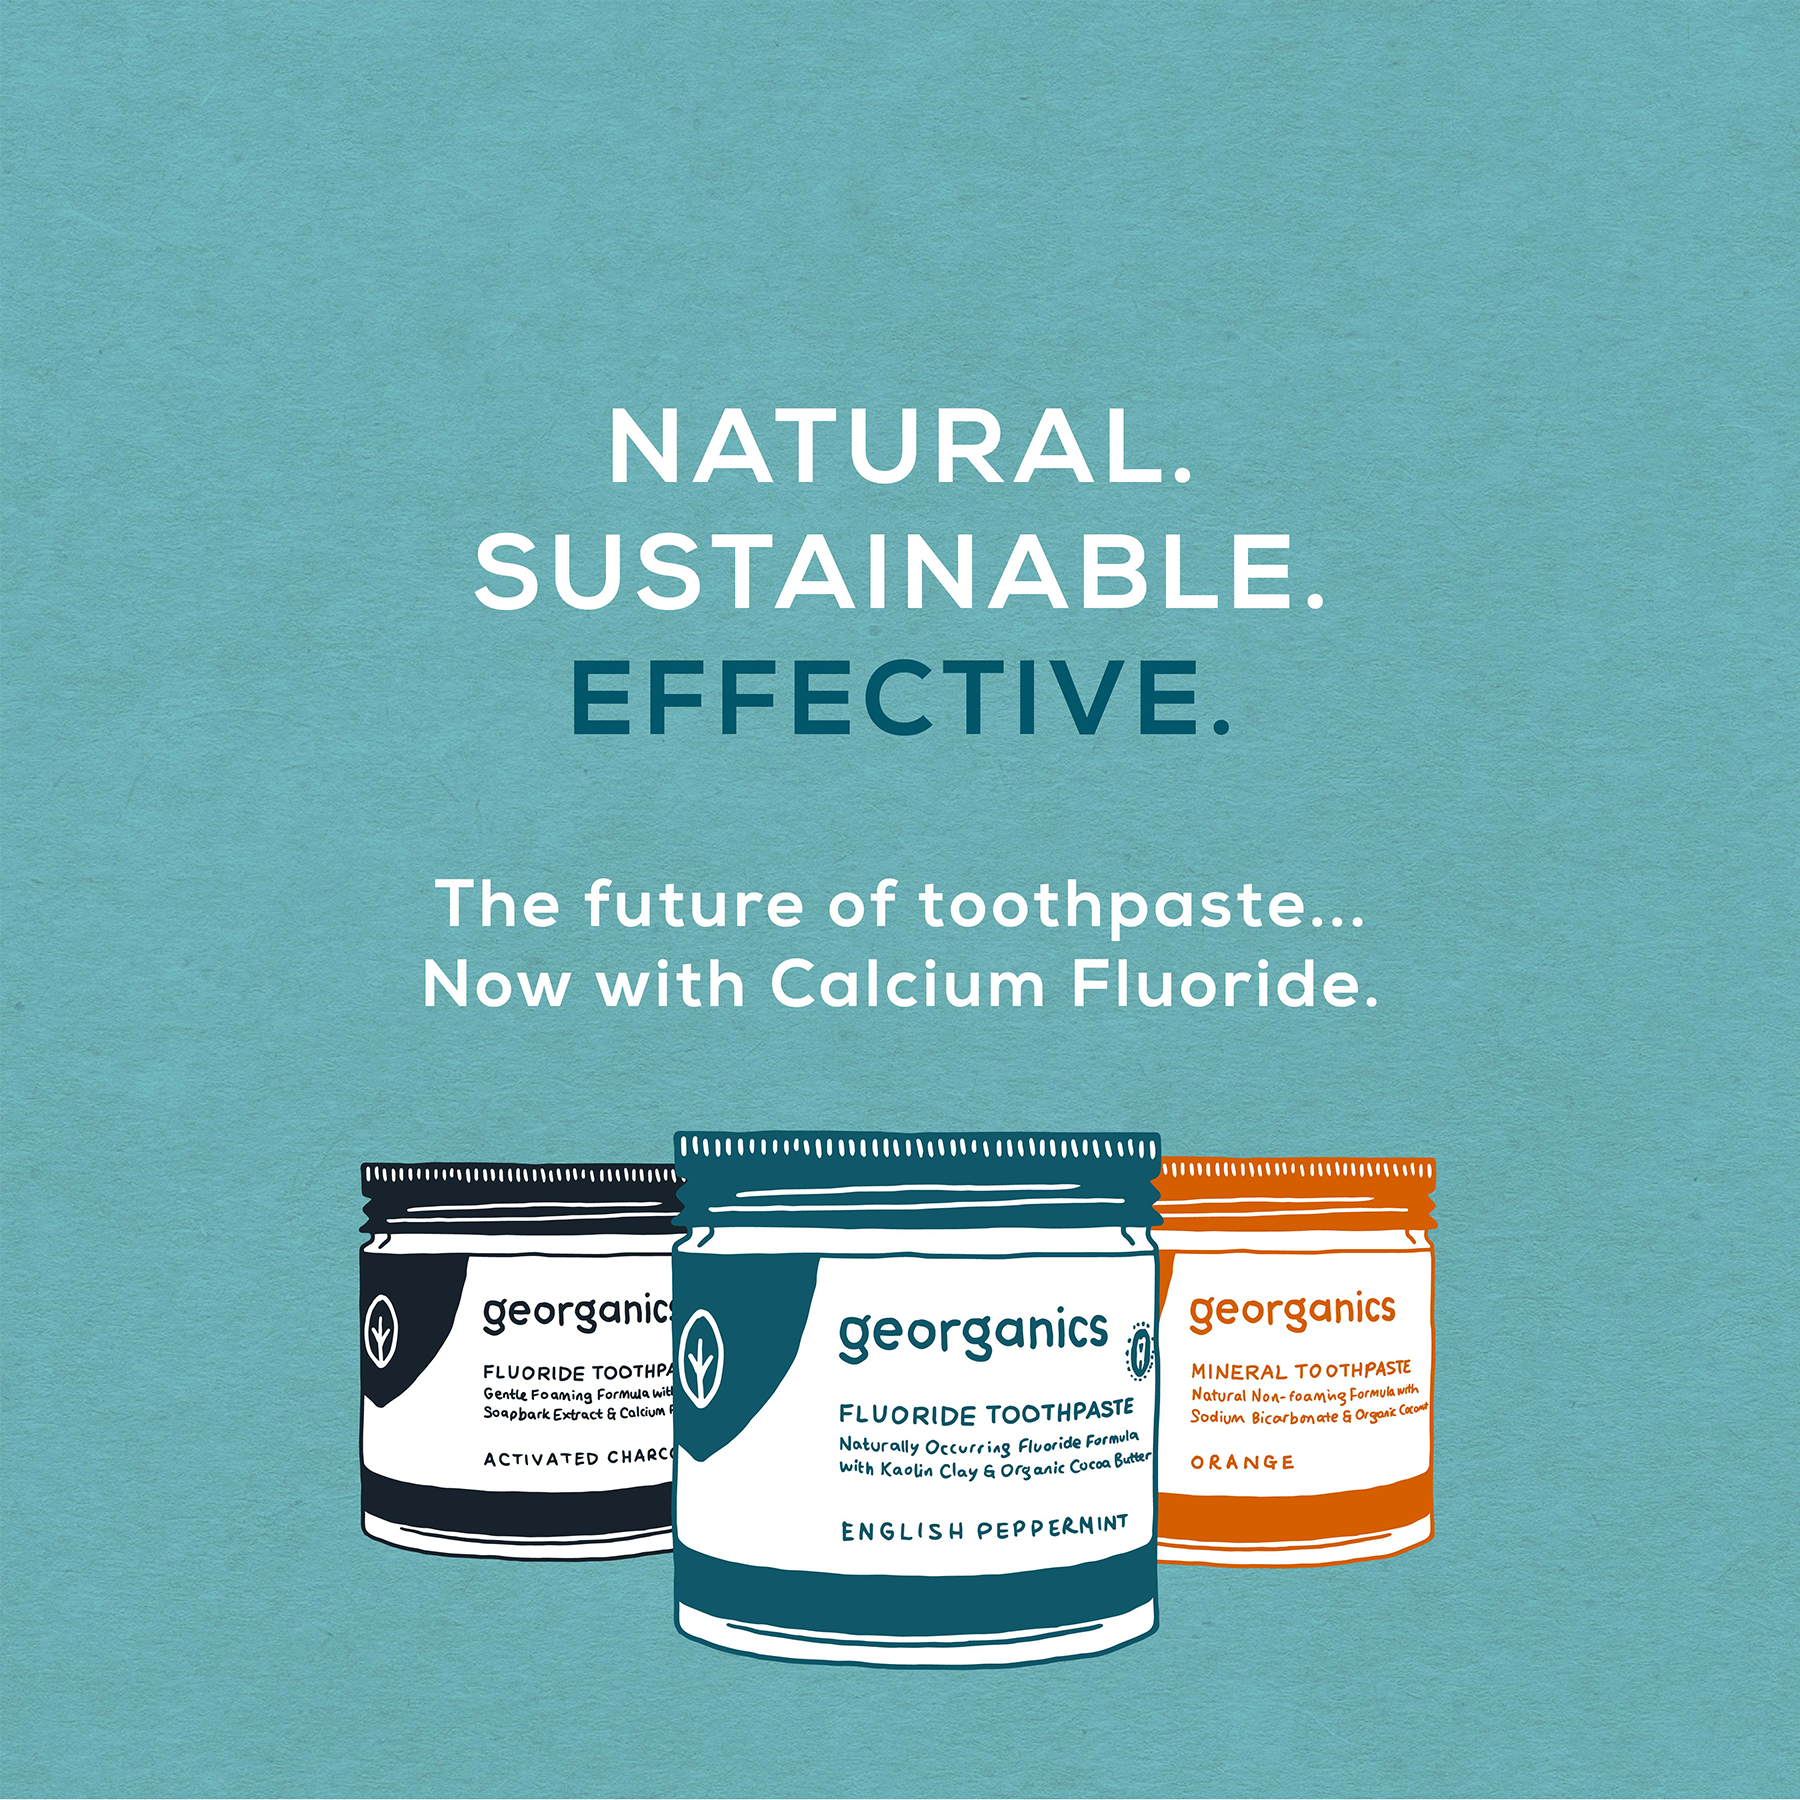 Fluoride Toothpaste is here!